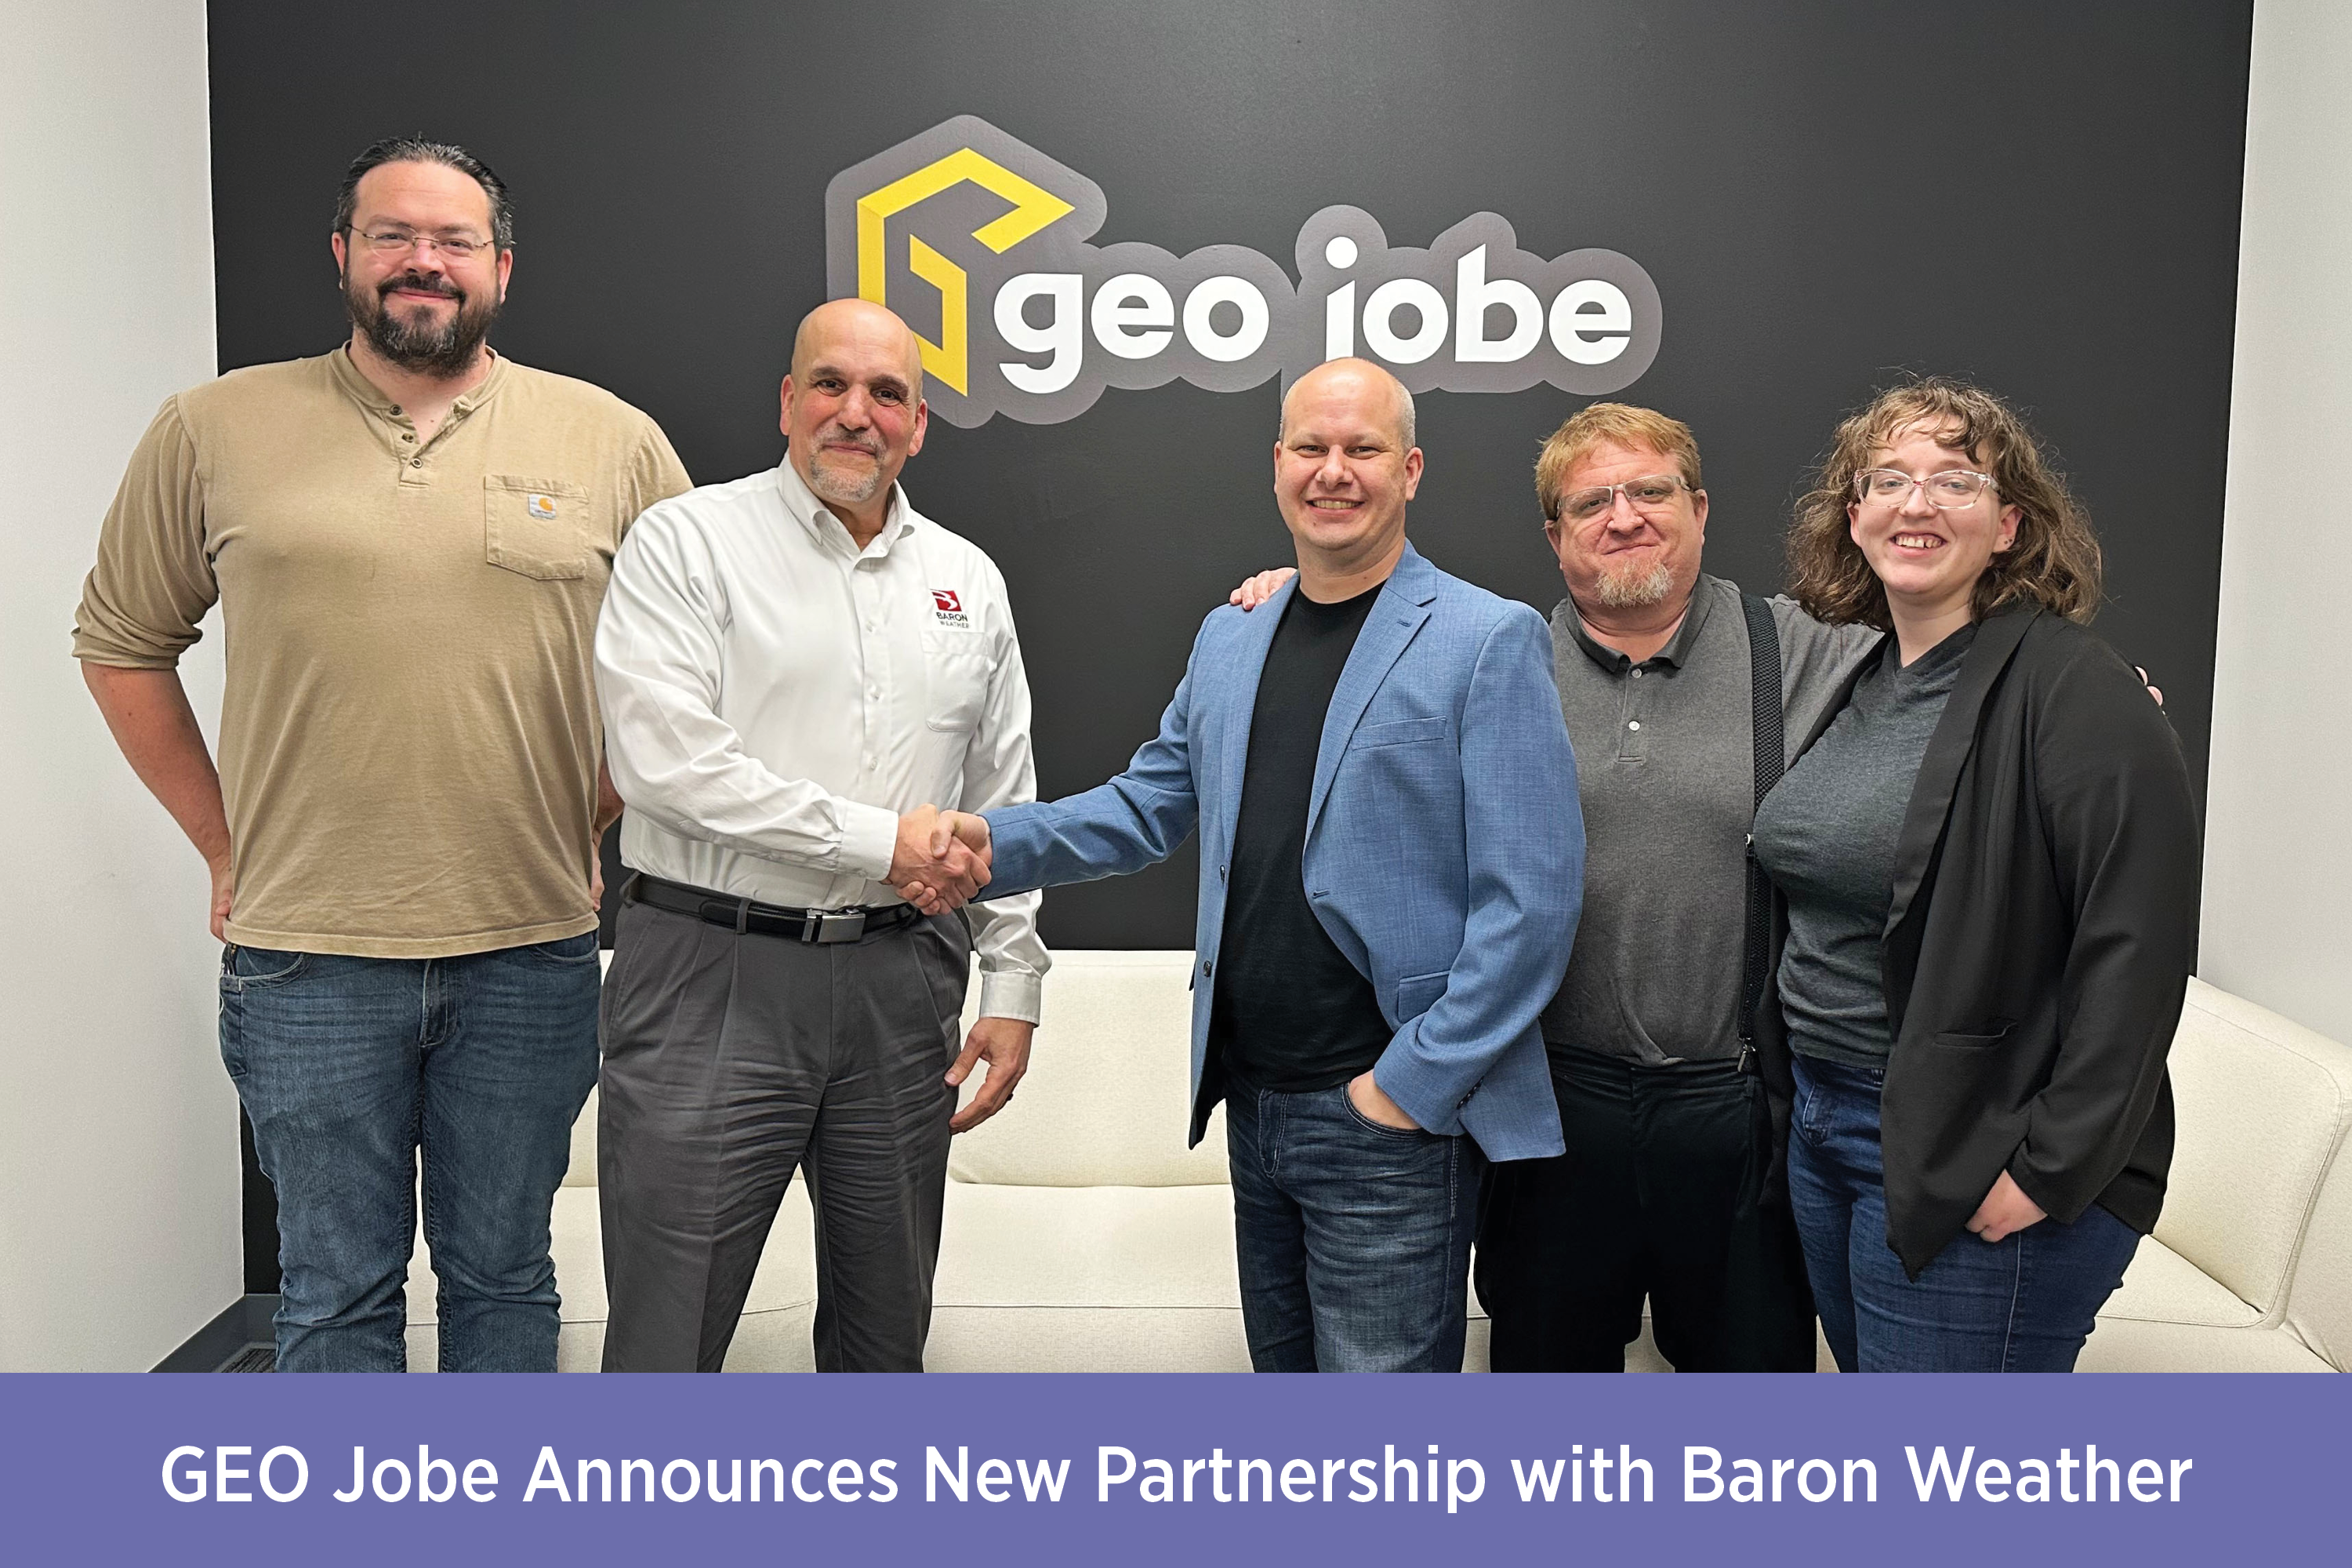 GEO Jobe Announces New Partnership with Baron Weather, Empowering Customers with Critical Weather Insights and Life-Saving Technologies